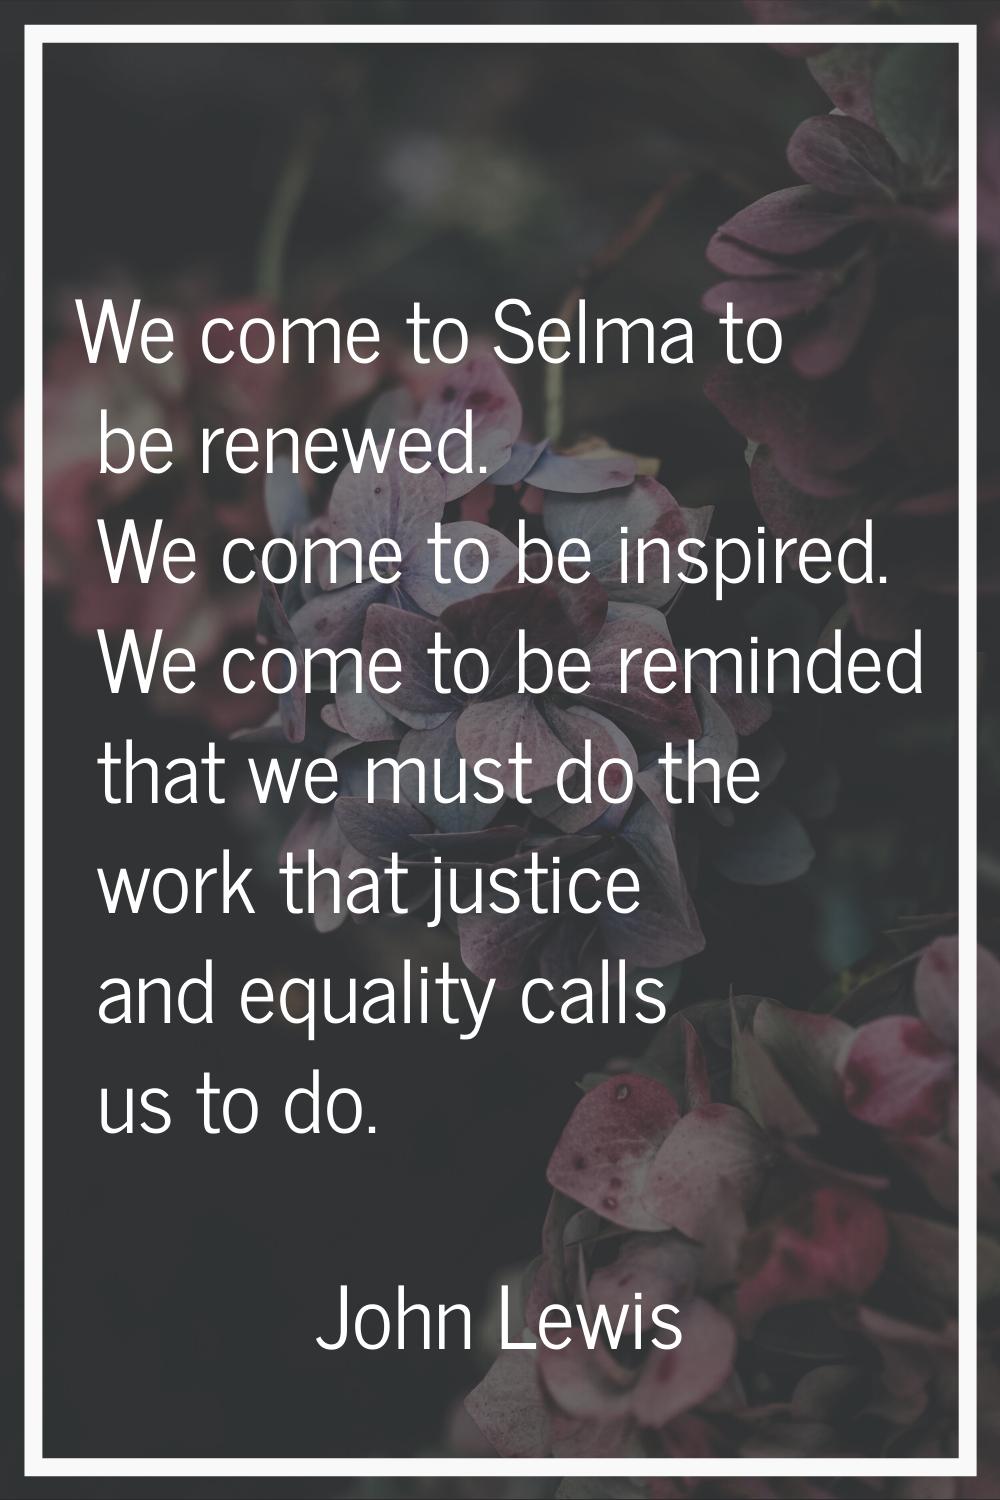 We come to Selma to be renewed. We come to be inspired. We come to be reminded that we must do the 